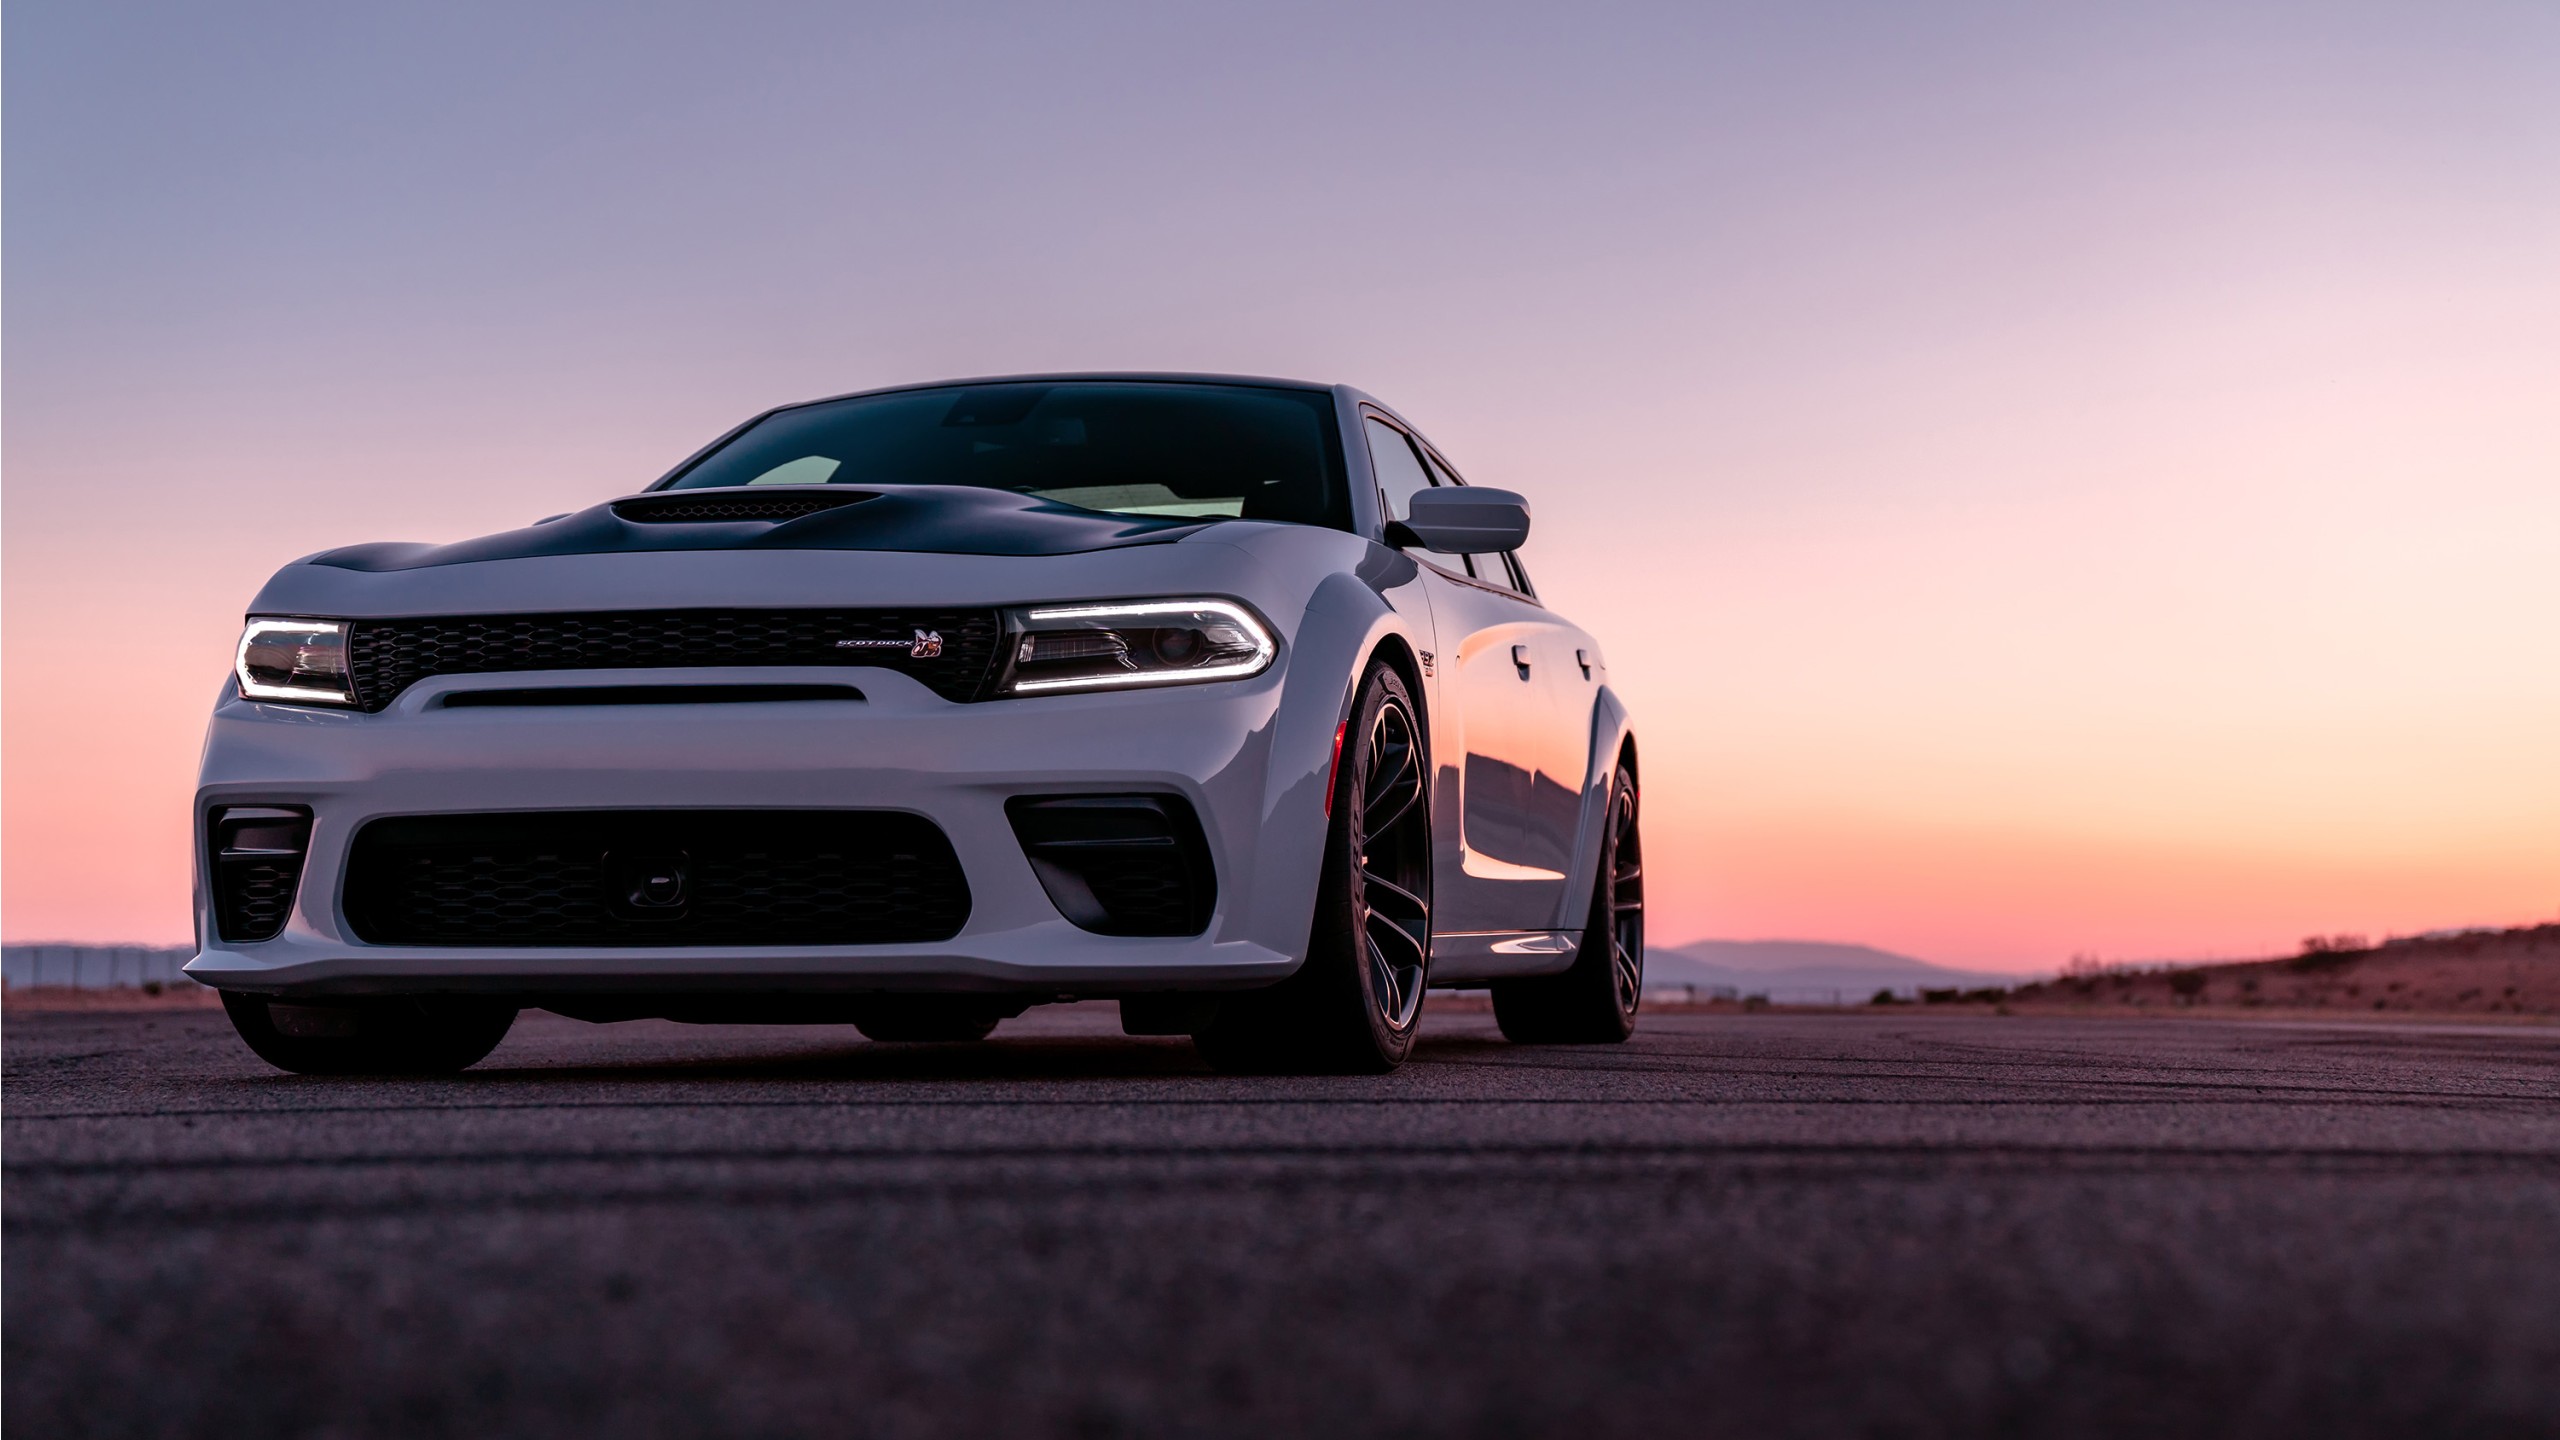 2020 Dodge Charger Scat Pack Widebody Wallpaper | HD Car Wallpapers